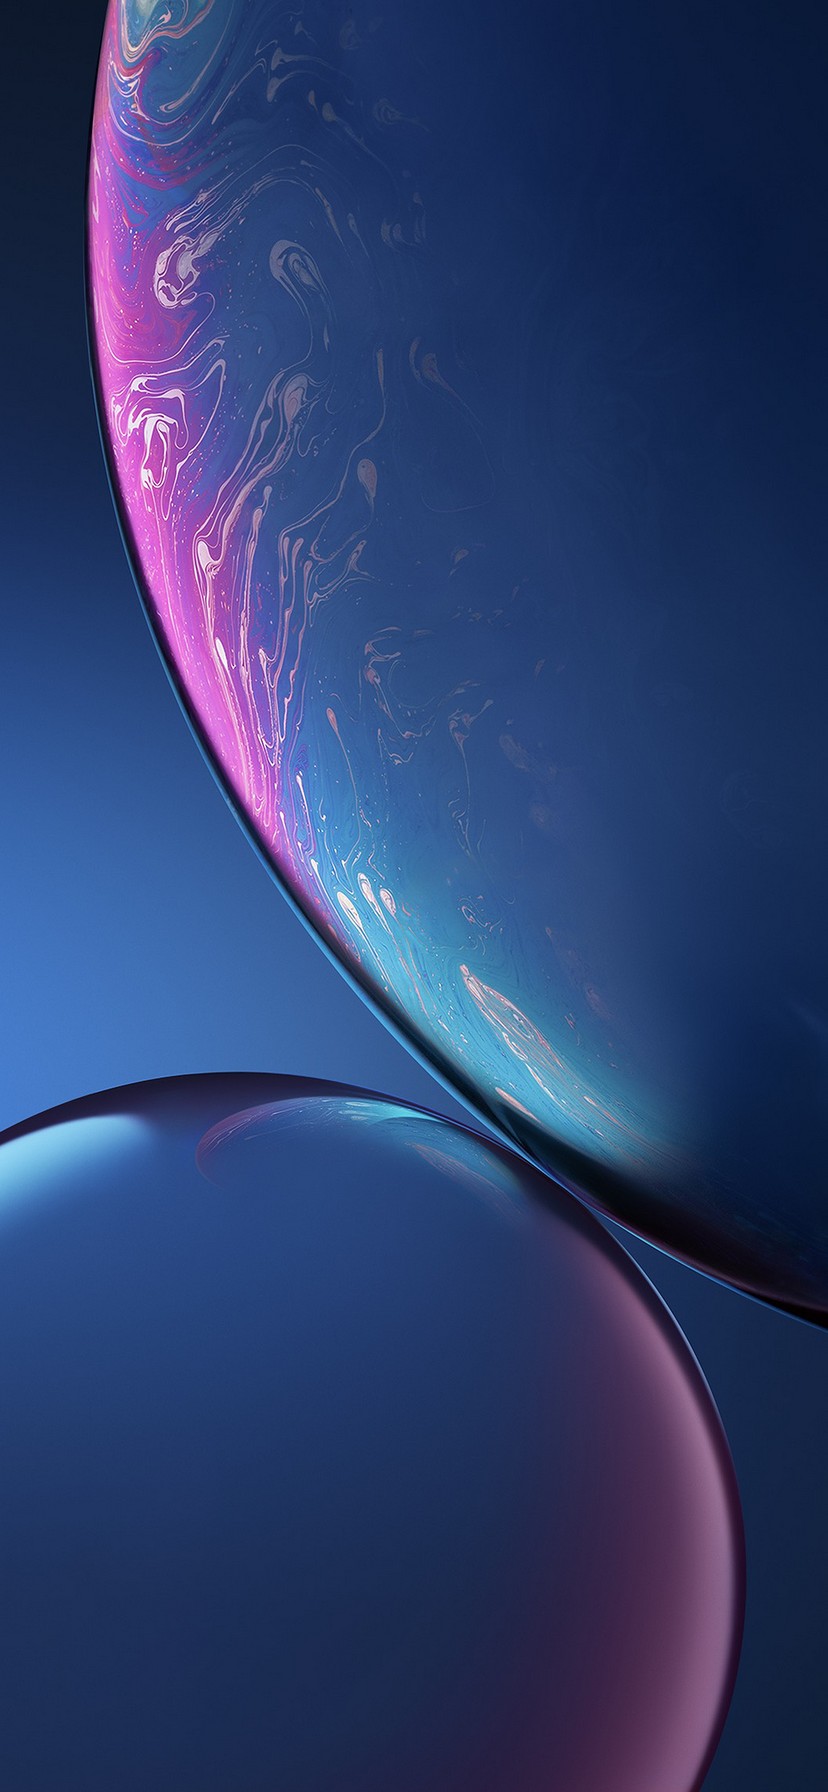 iPhone XR Screensaver With high-resolution 828X1792 pixel. You can set as wallpaper for Apple iPhone X, XS Max, XR, 8, 7, 6, SE, iPad. Enjoy and share your favorite HD wallpapers and background images